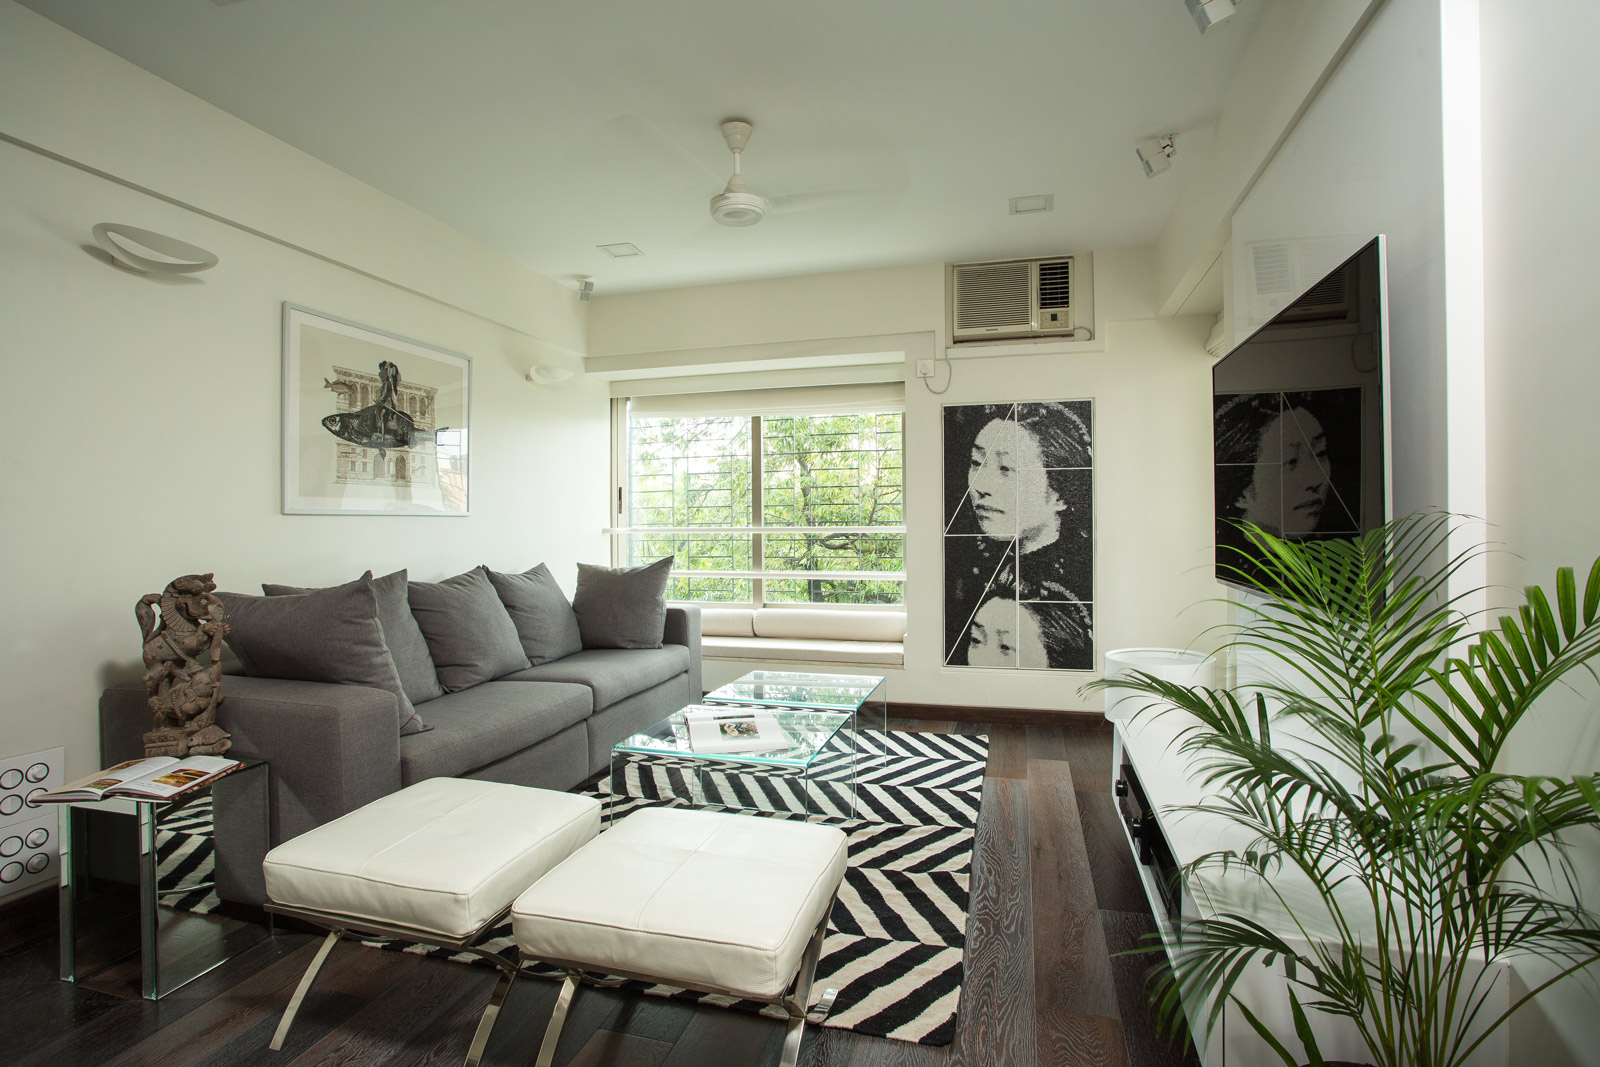 Living Room Design Ideas With Chevron Printed Rug, White Wall Paint & Grey Sofa - Beautiful Homes